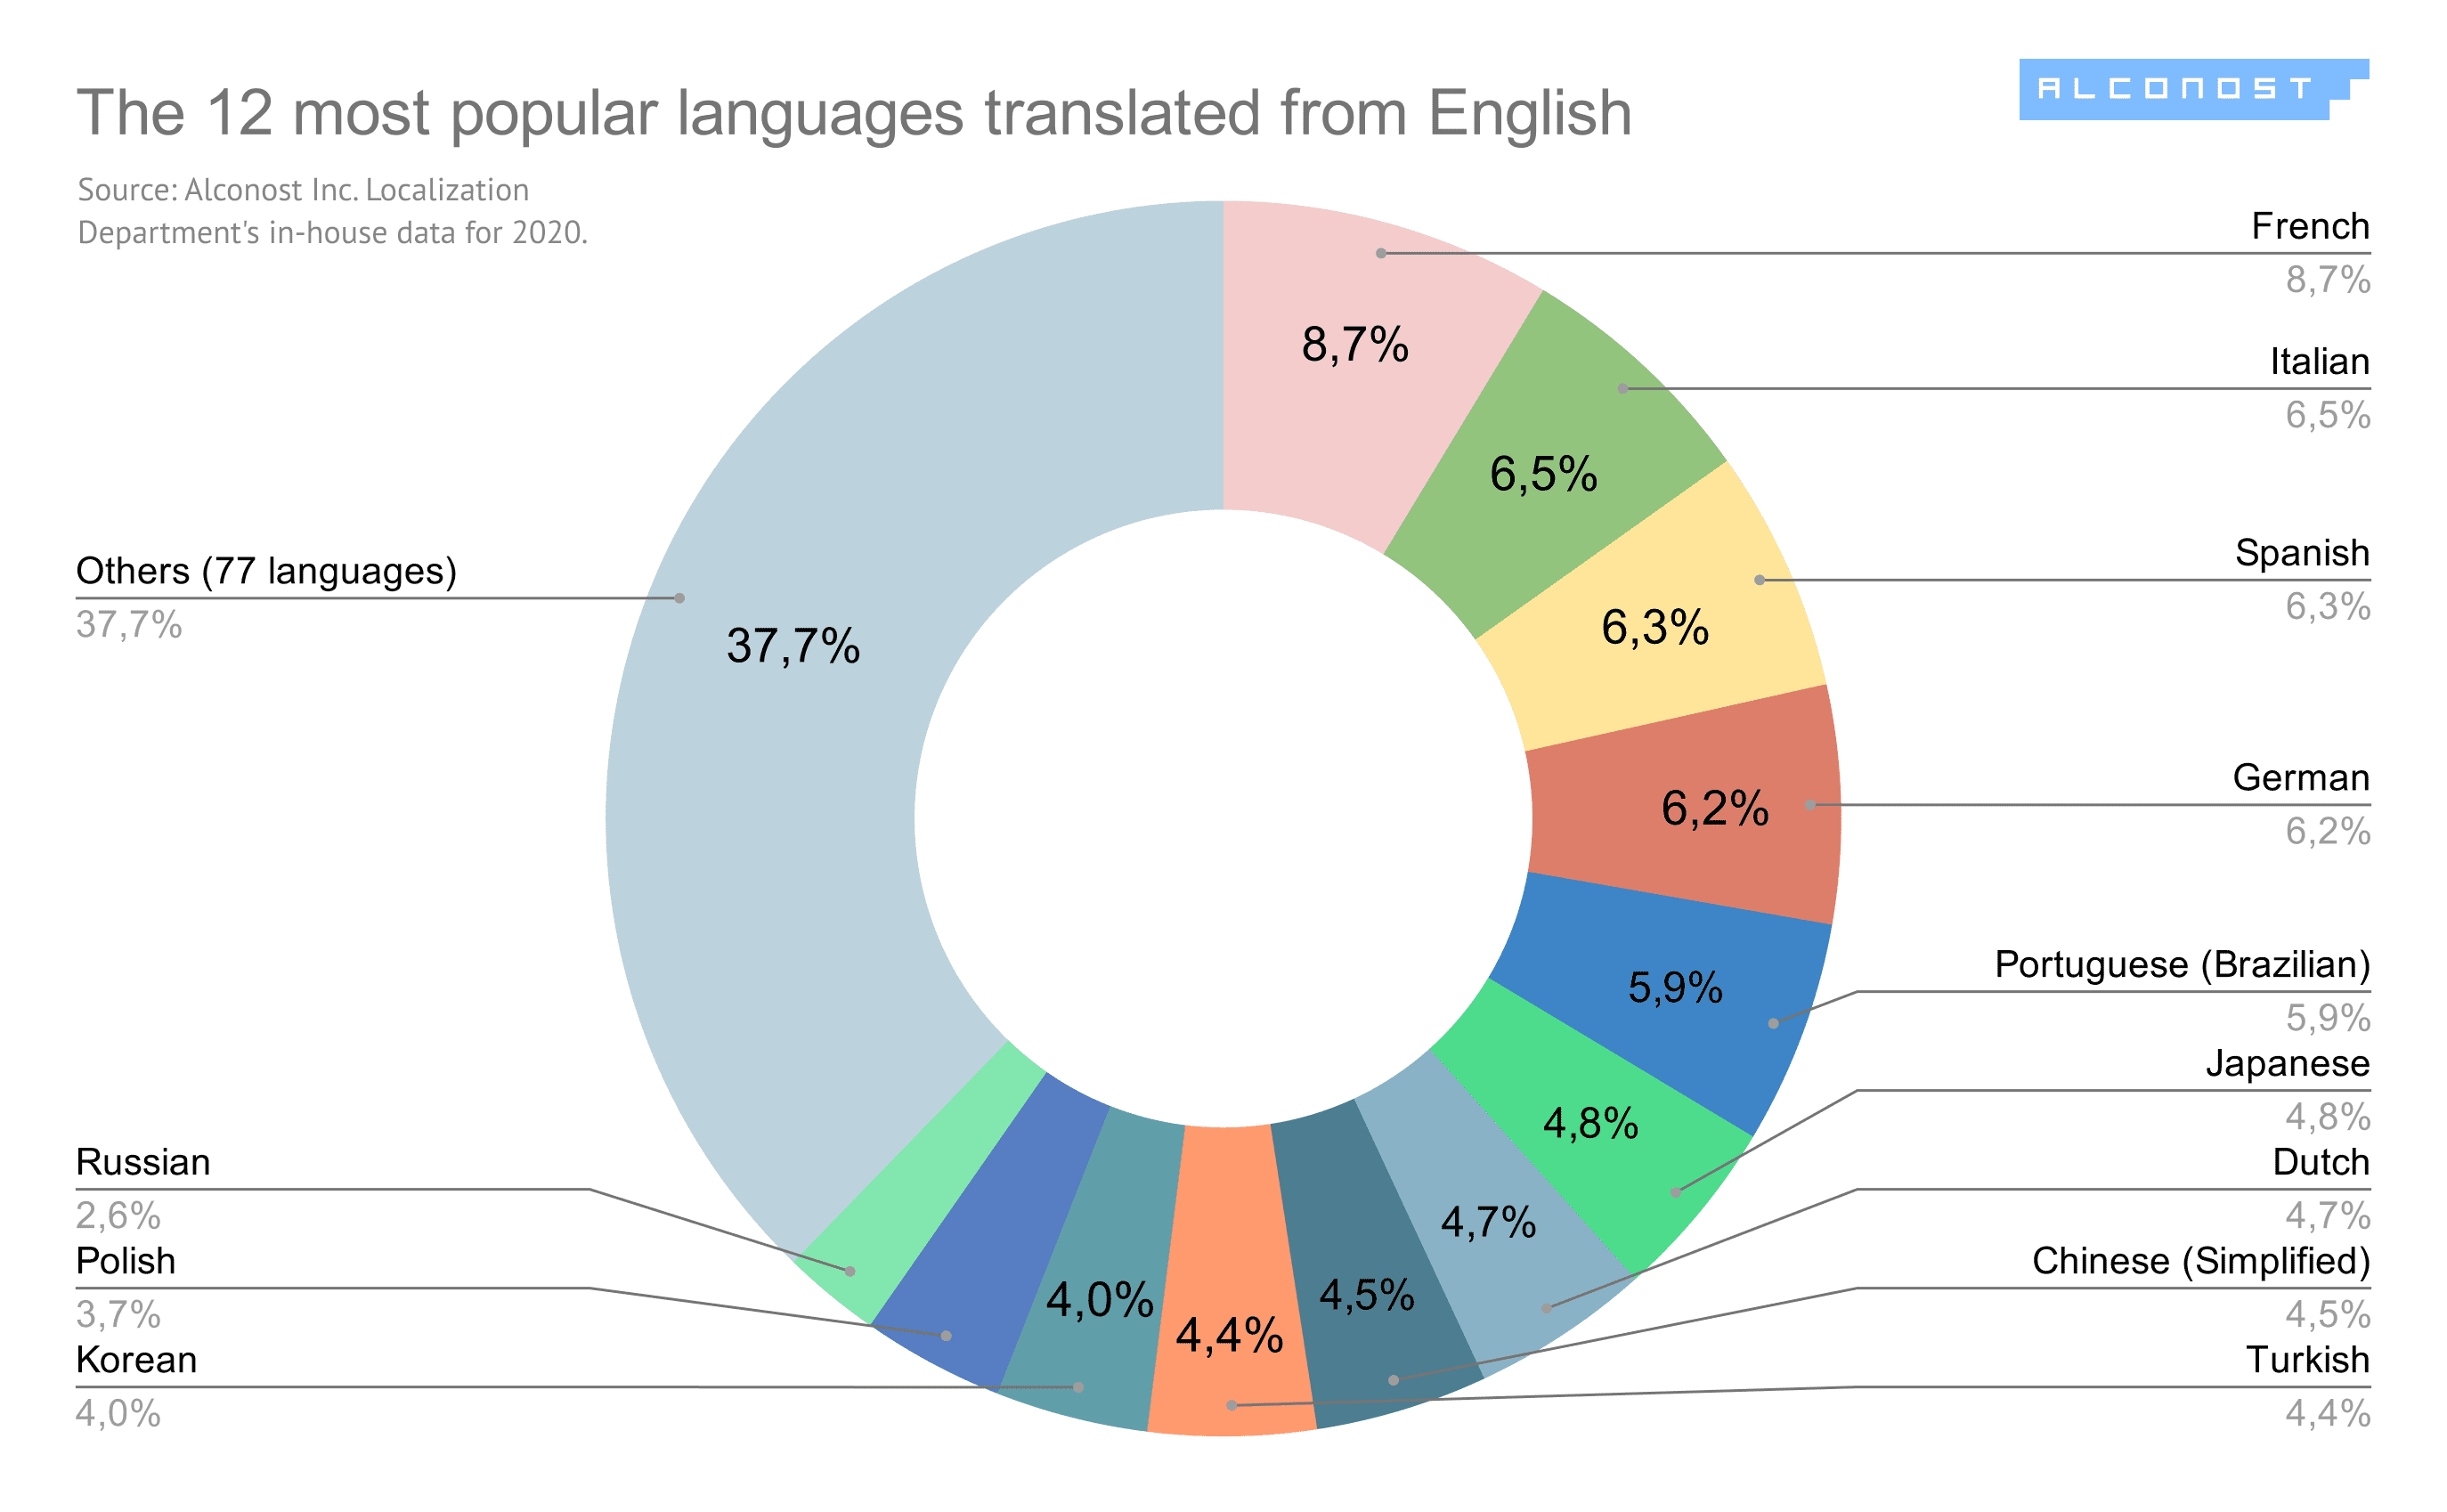 Diagram #1. The 12 most popular languages translated from English